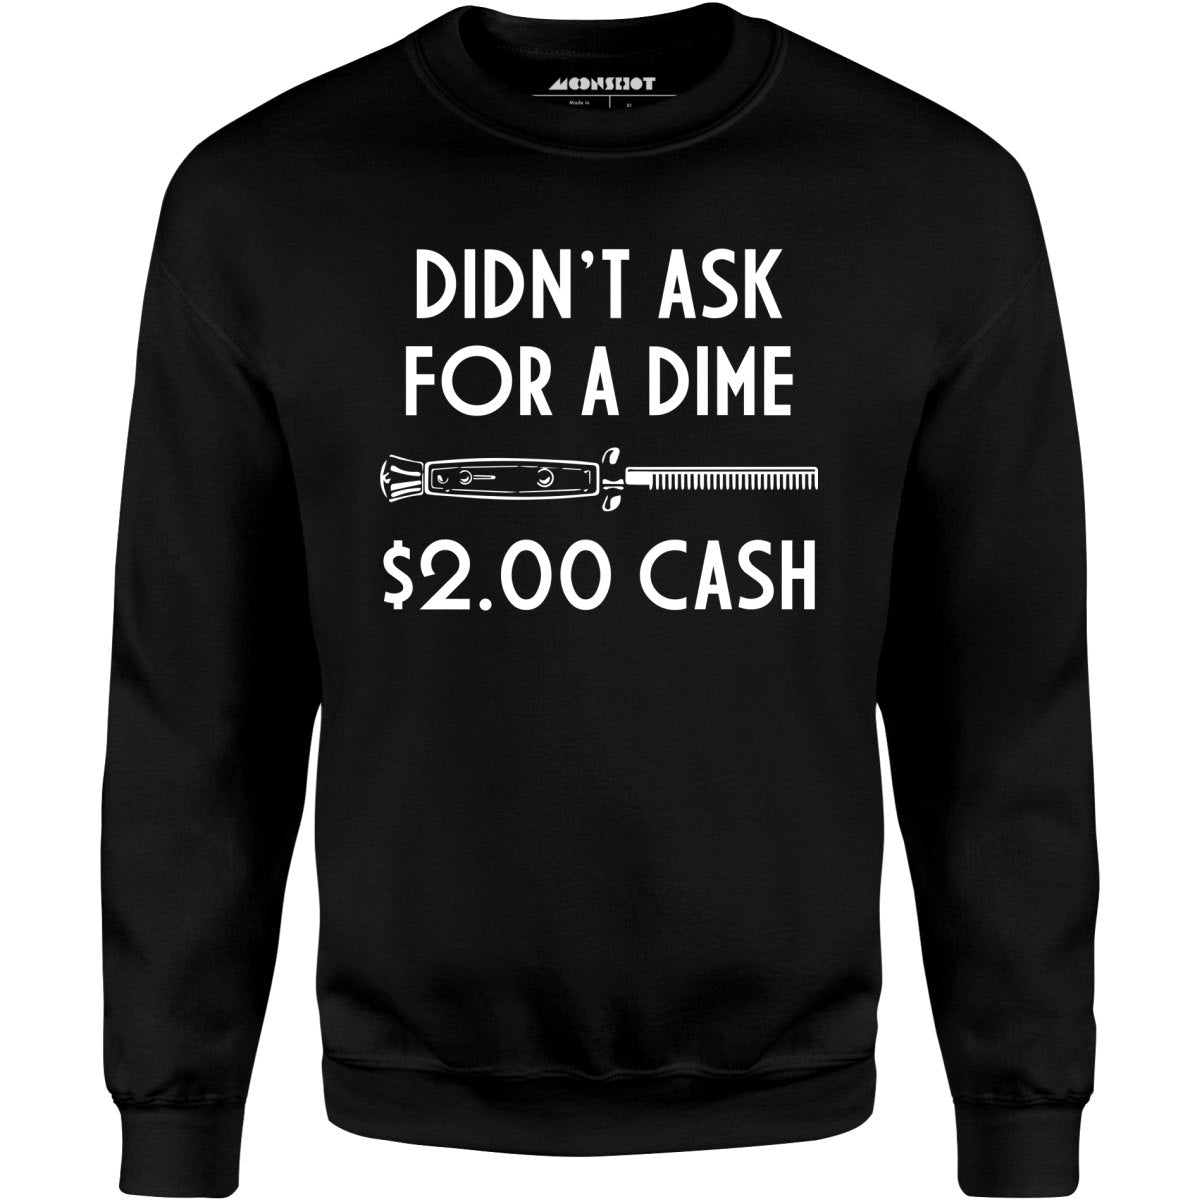 Didn't Ask For a Dime - Unisex Sweatshirt